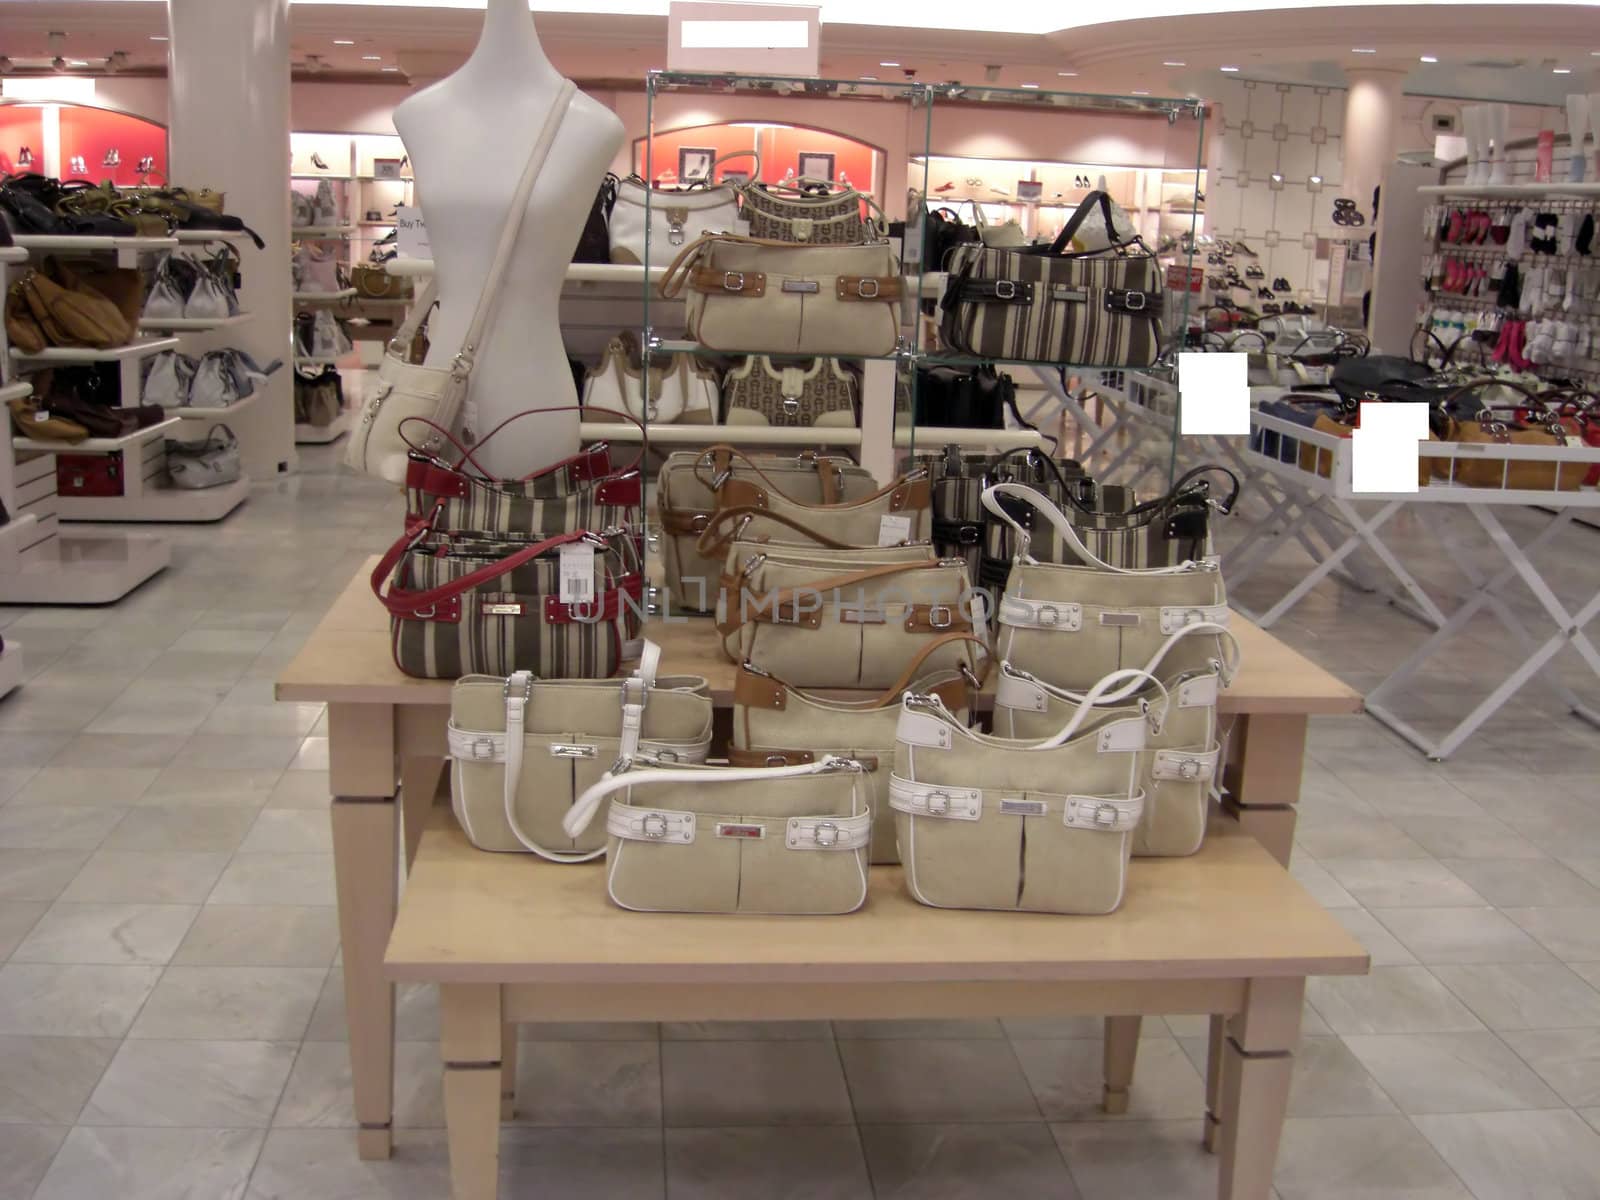 A retail department is displaying a variety of designer handbags in all colors, sizes, and shapes.